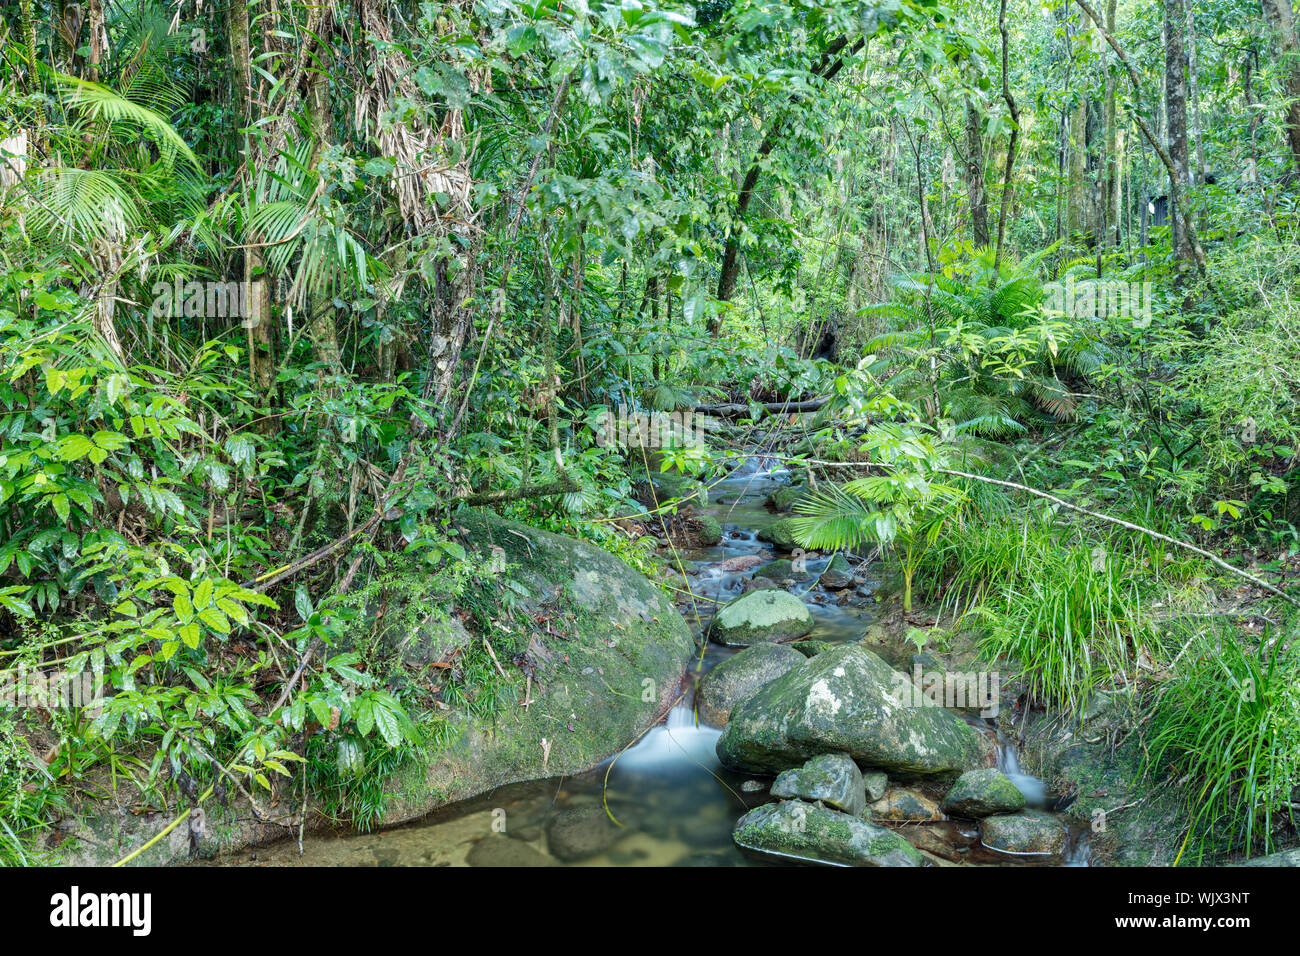 Mossman, Queensland, Australia. Small stream in the lush wet rain forest of Mossman Gorge at Mossman in tropical Far North Queensland. Stock Photo